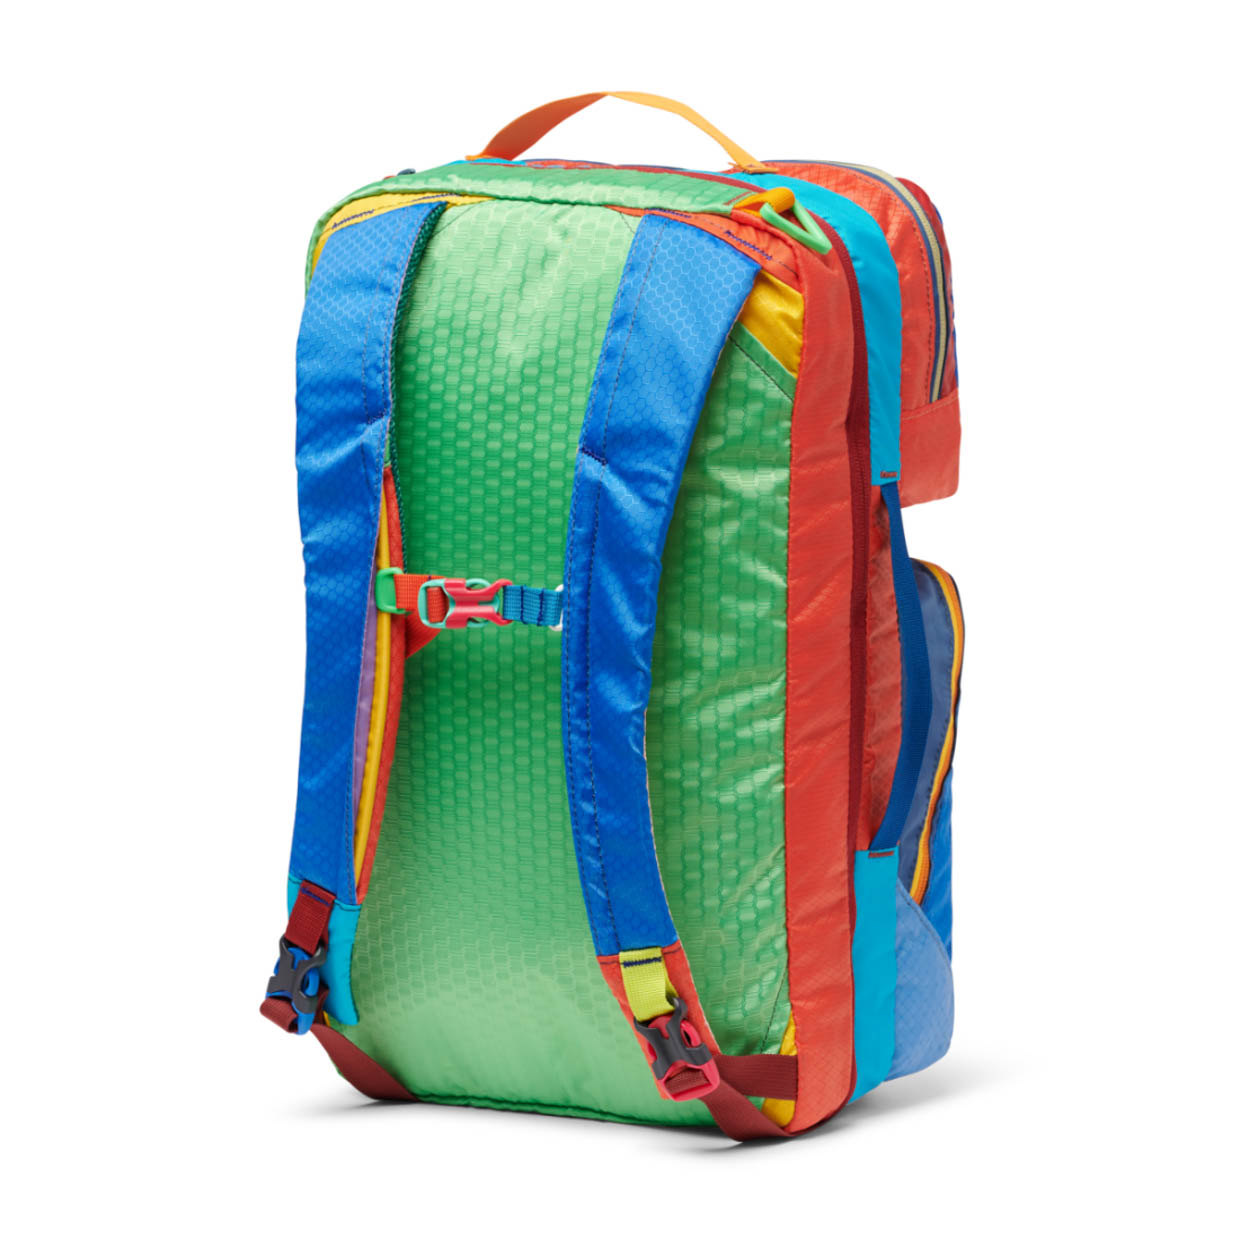 Every Cotopaxi Del Día Backpack is One of a Kind